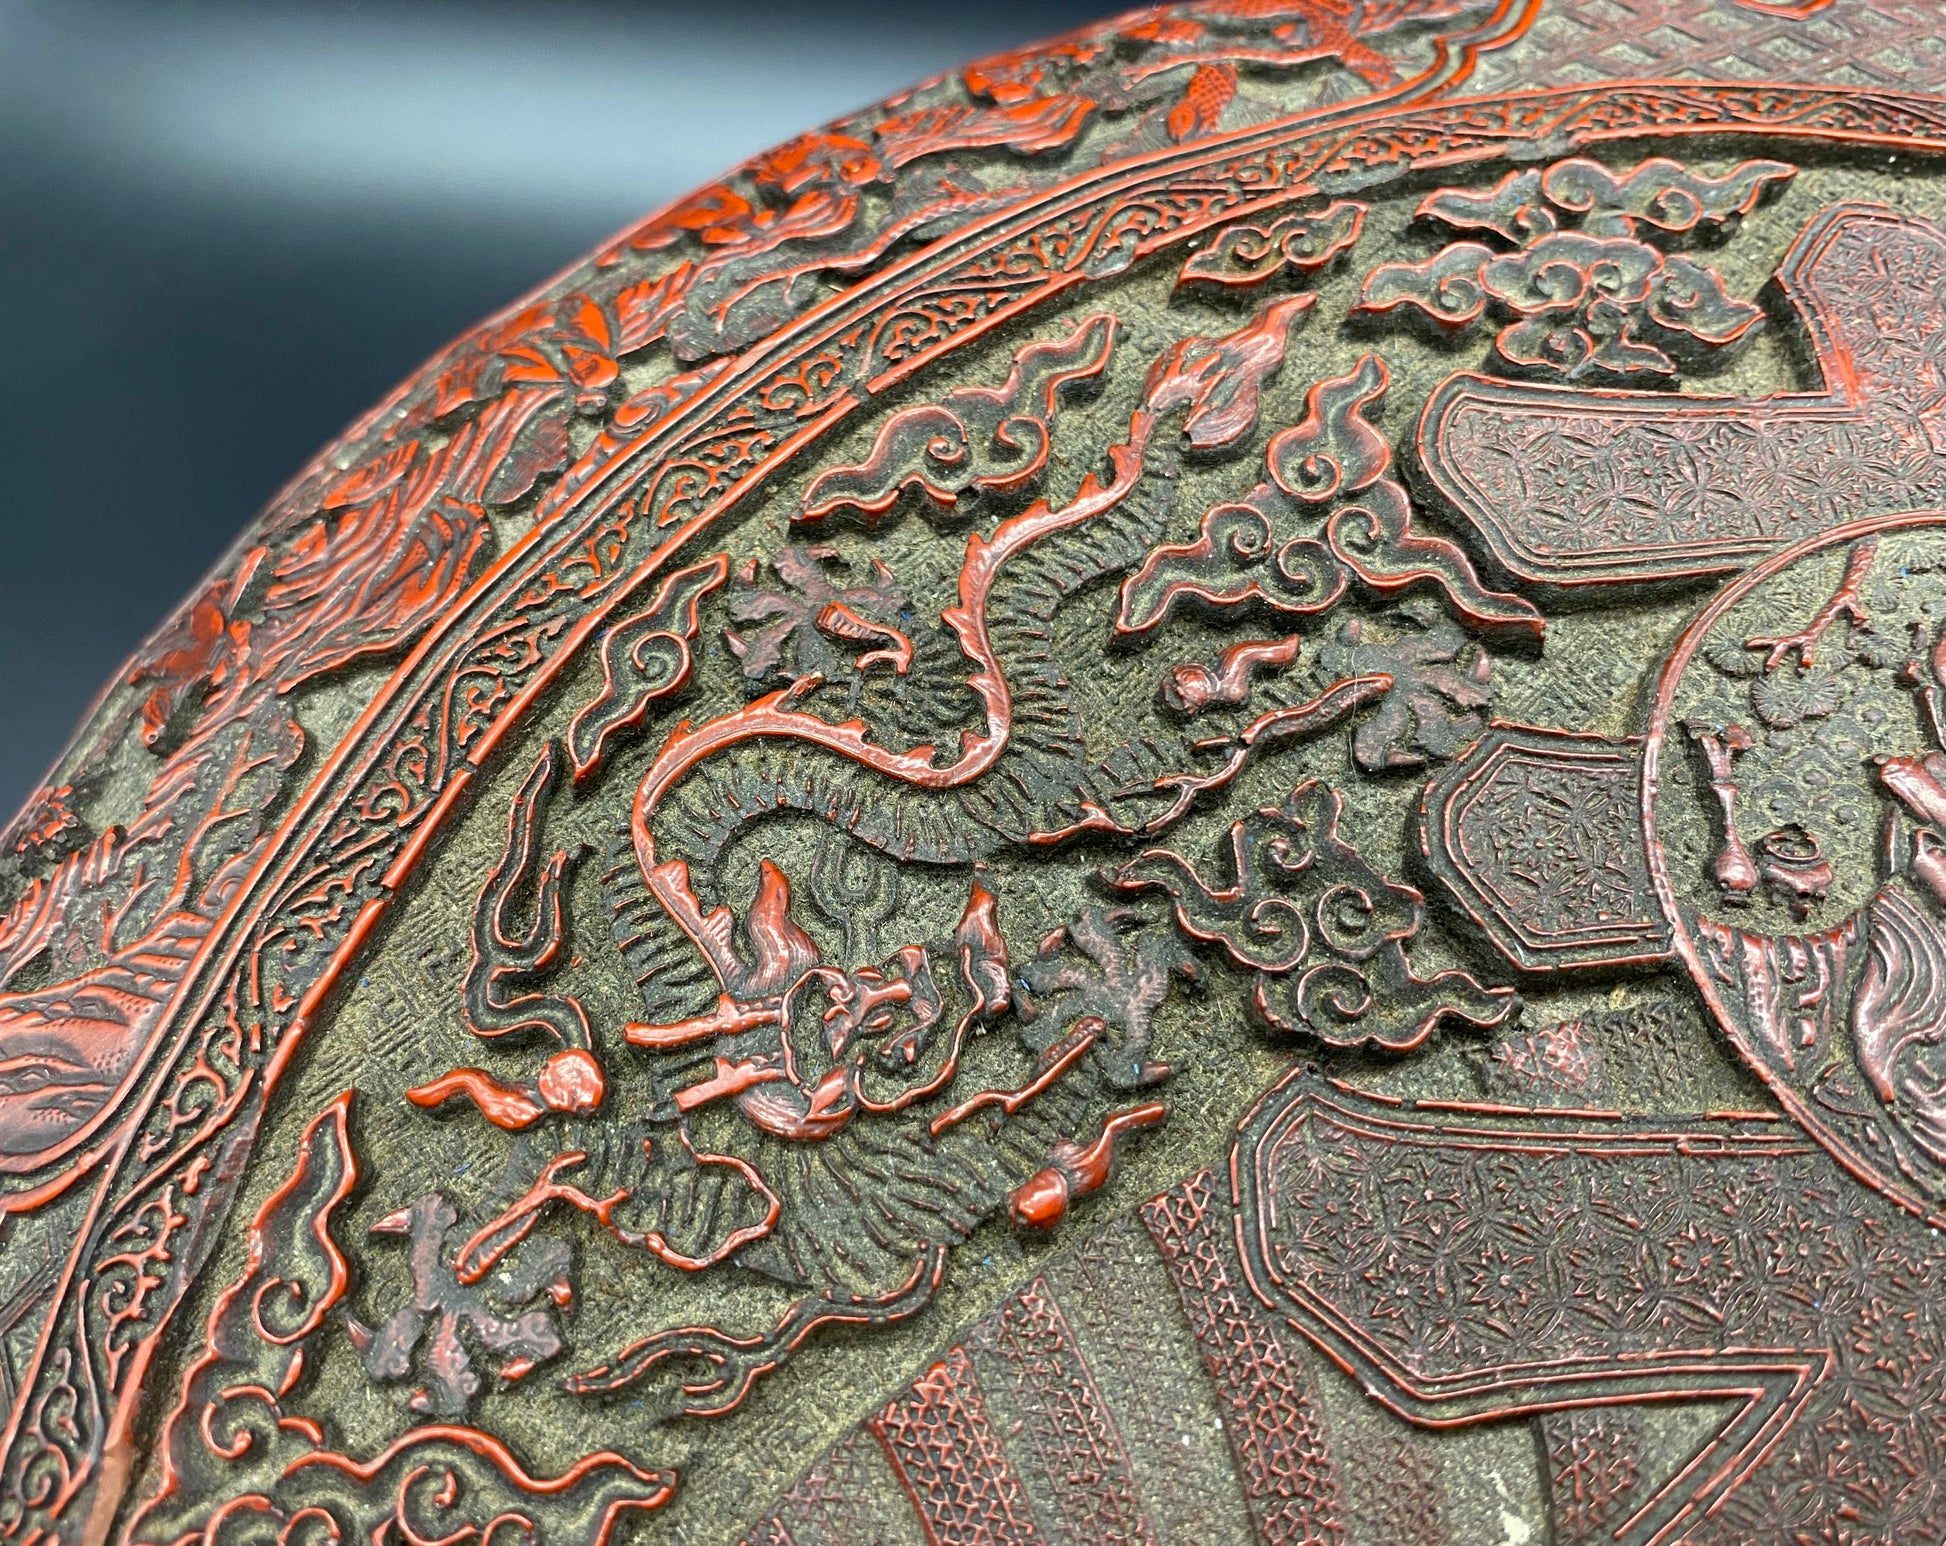 KB Antiques & Collectables online - LARGE CINNABAR LACQUER 'DRAGON' BOX AND COVER QING DYNASTY